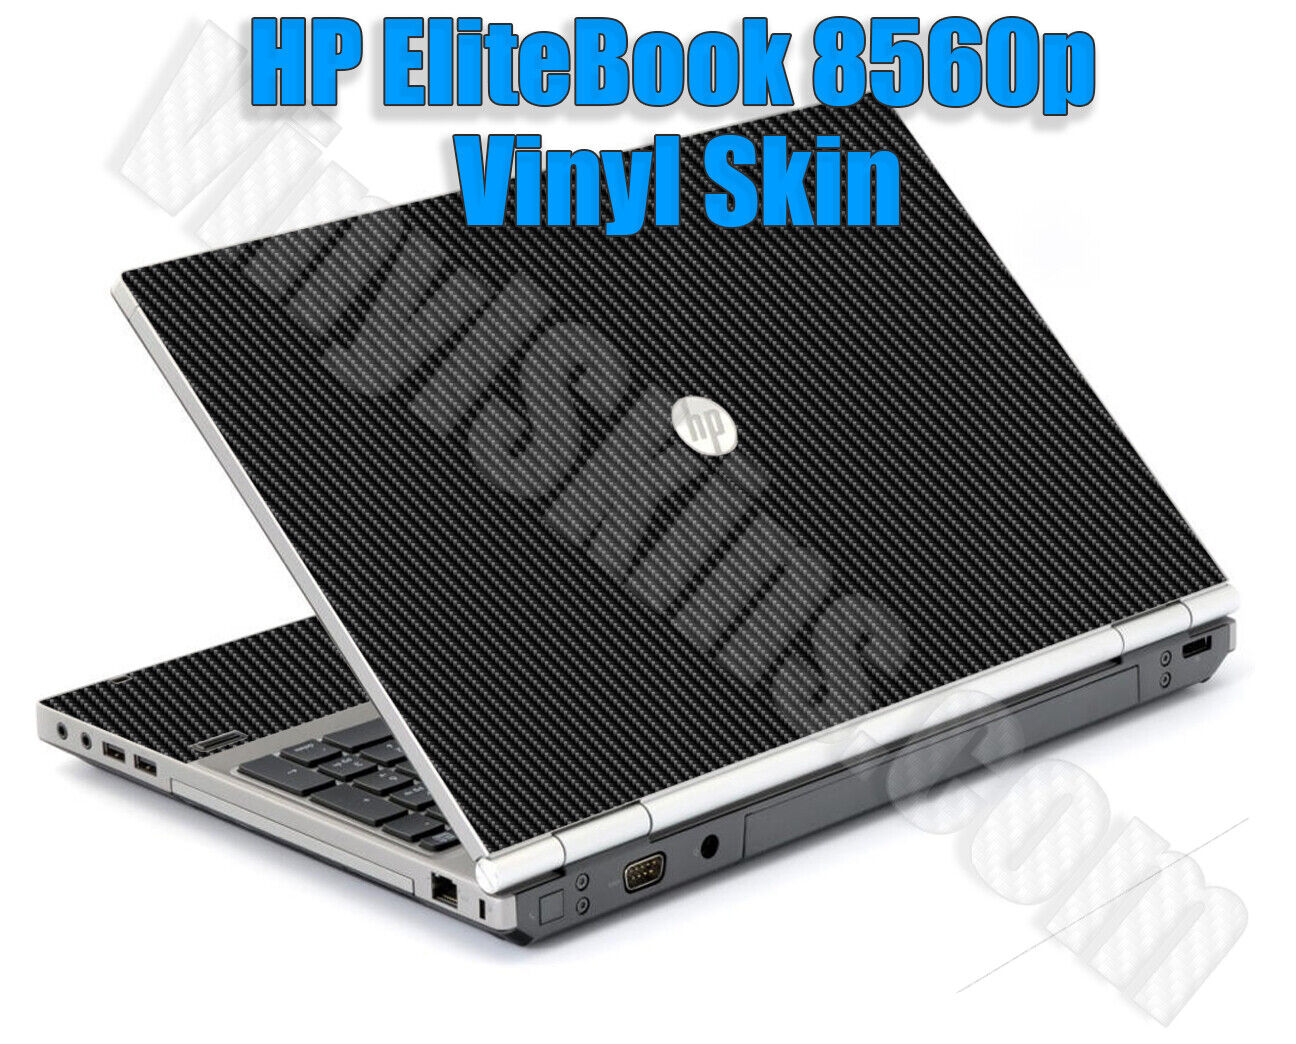 Any 1 Vinyl Sticker / Decal / Skin for HP EliteBook 8560p - Free US Shipping